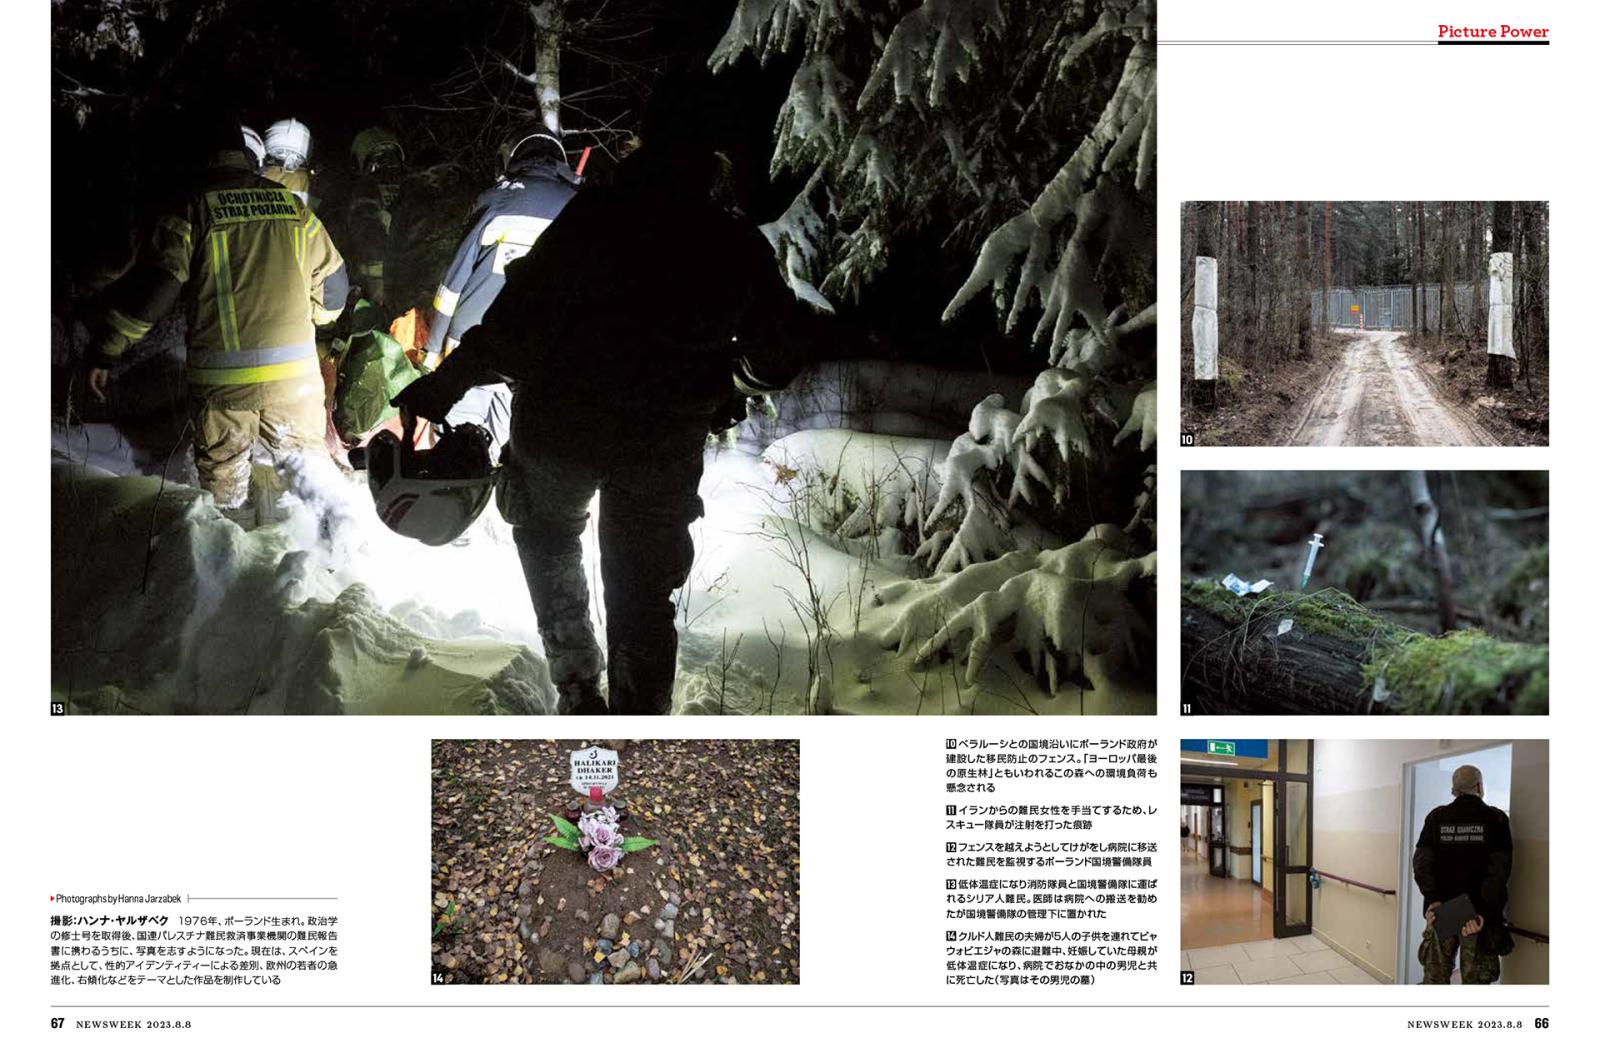 Thumbnail of Newsweek Japan publishes part of "The Jungle" project